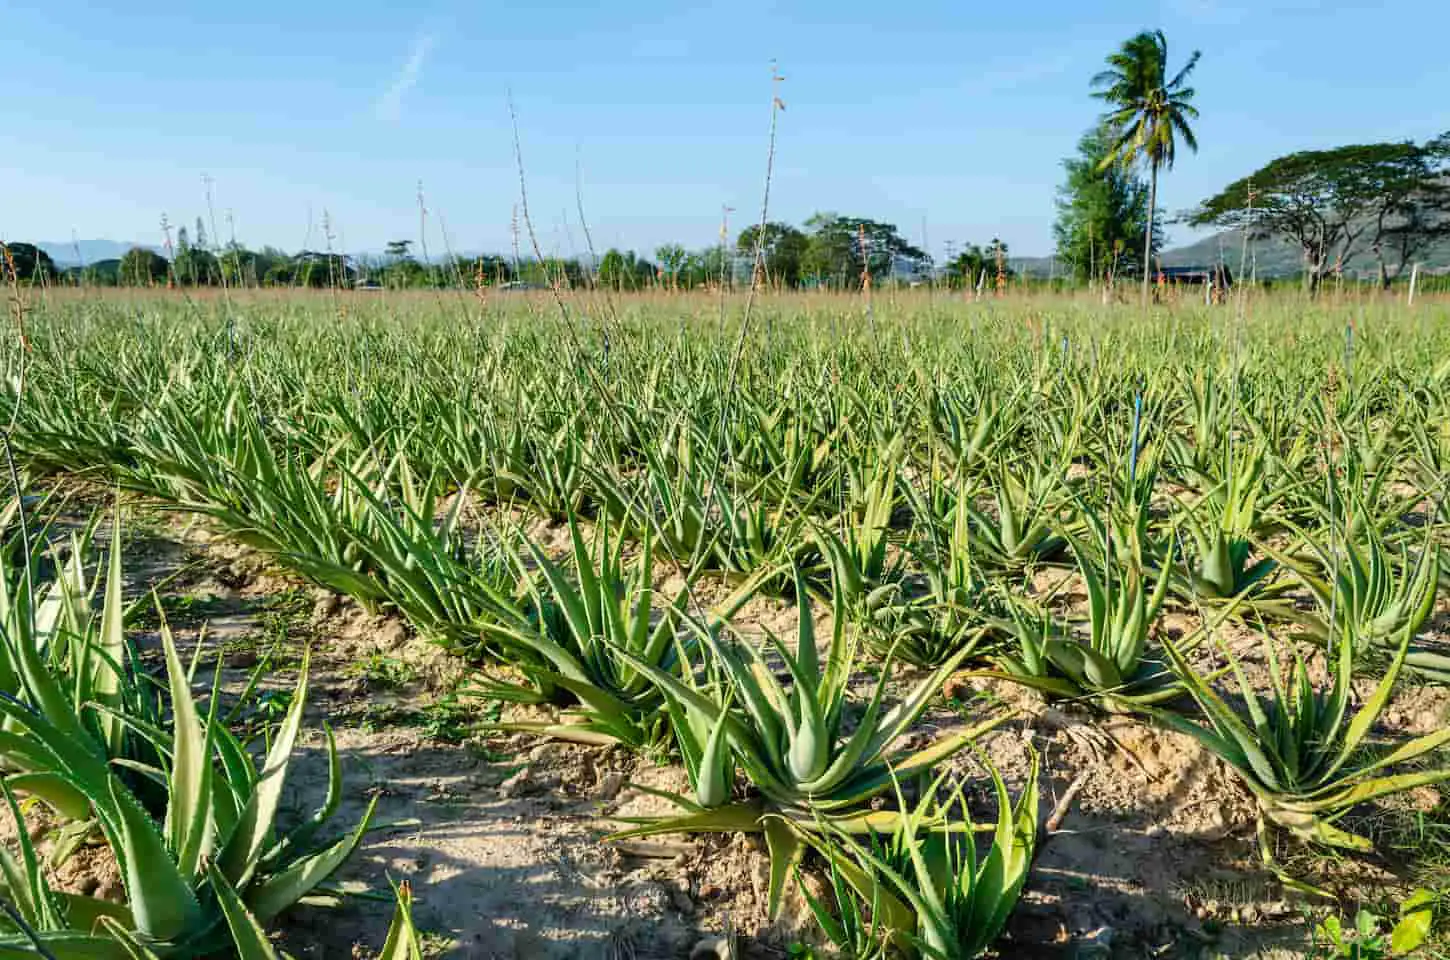 An image of a Scenic view of a crop of aloe vera plants receding into the distance, Thailand.